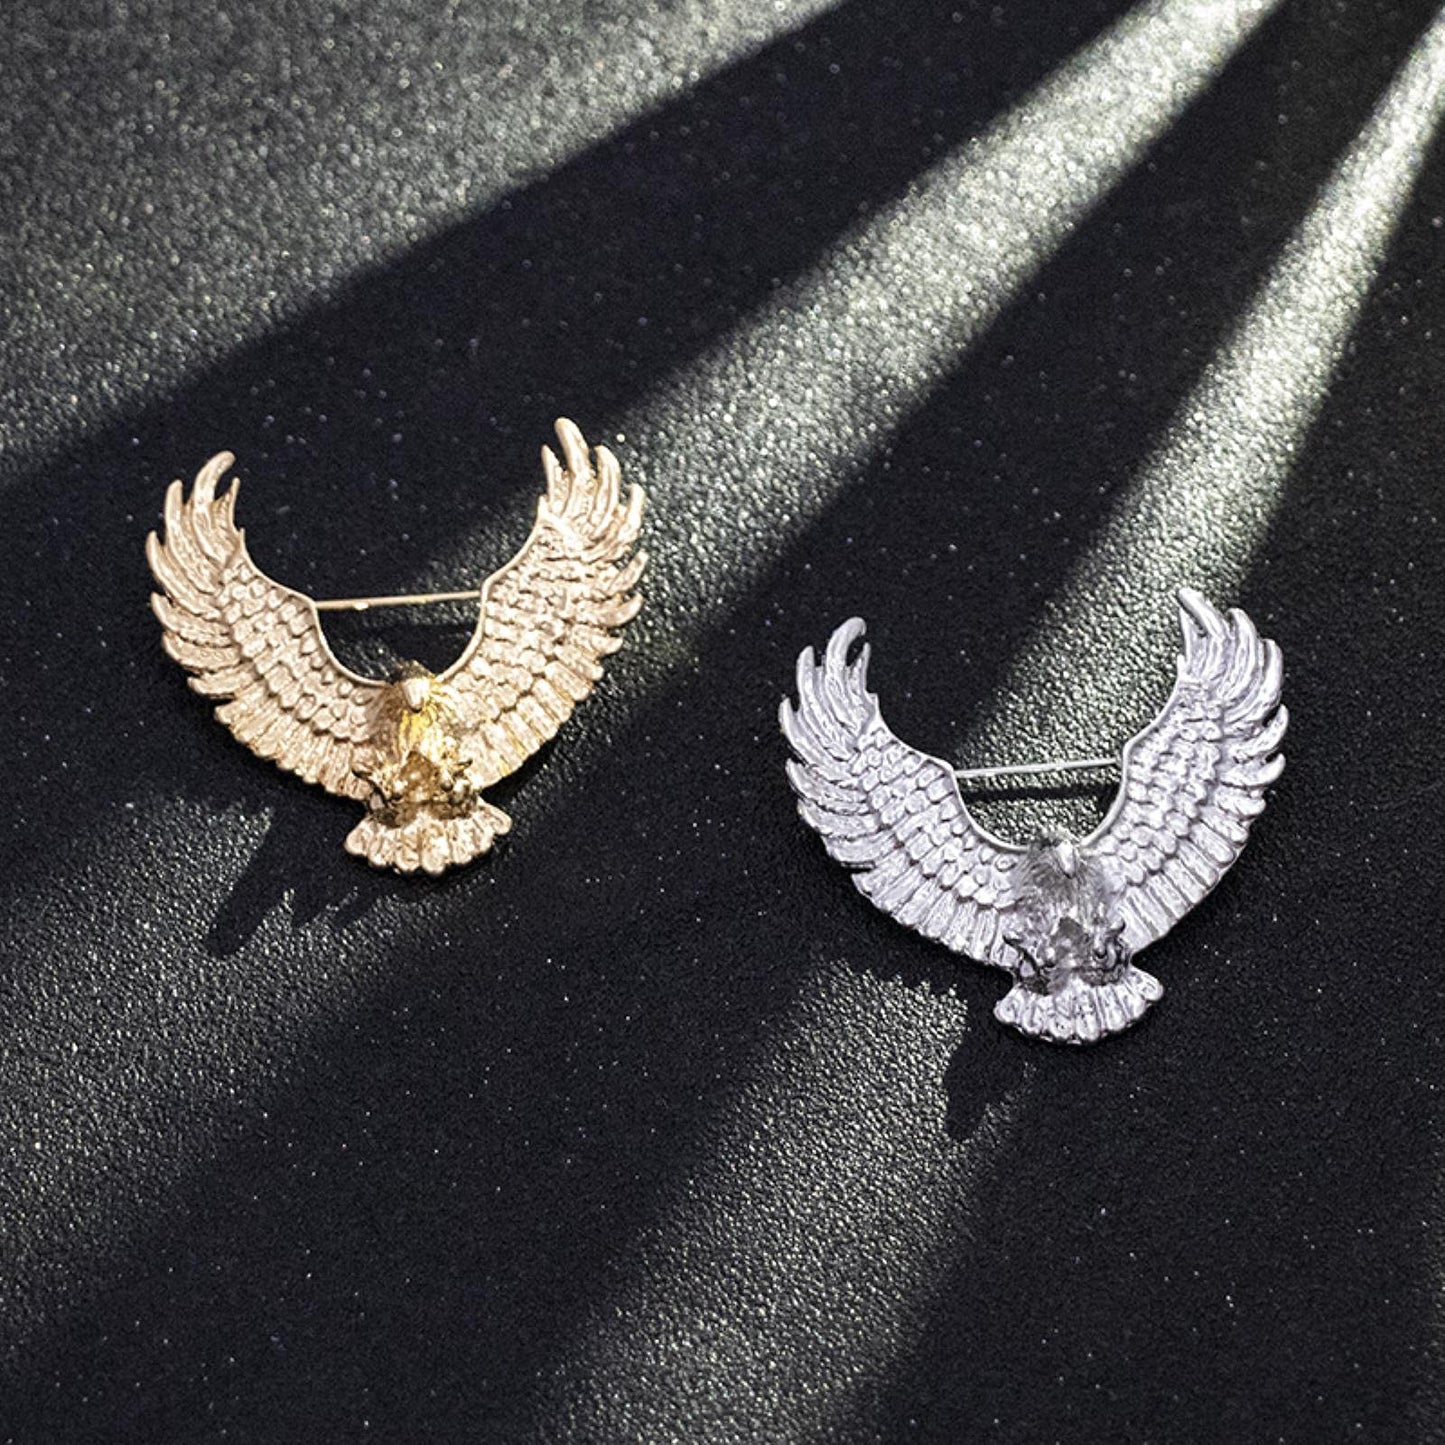 Retro Metal Eagle Brooch Animal Gold Lapel Pin Fashion Suit Shirt Corsage Collar Badge Brooches Jewelry Men Accessories